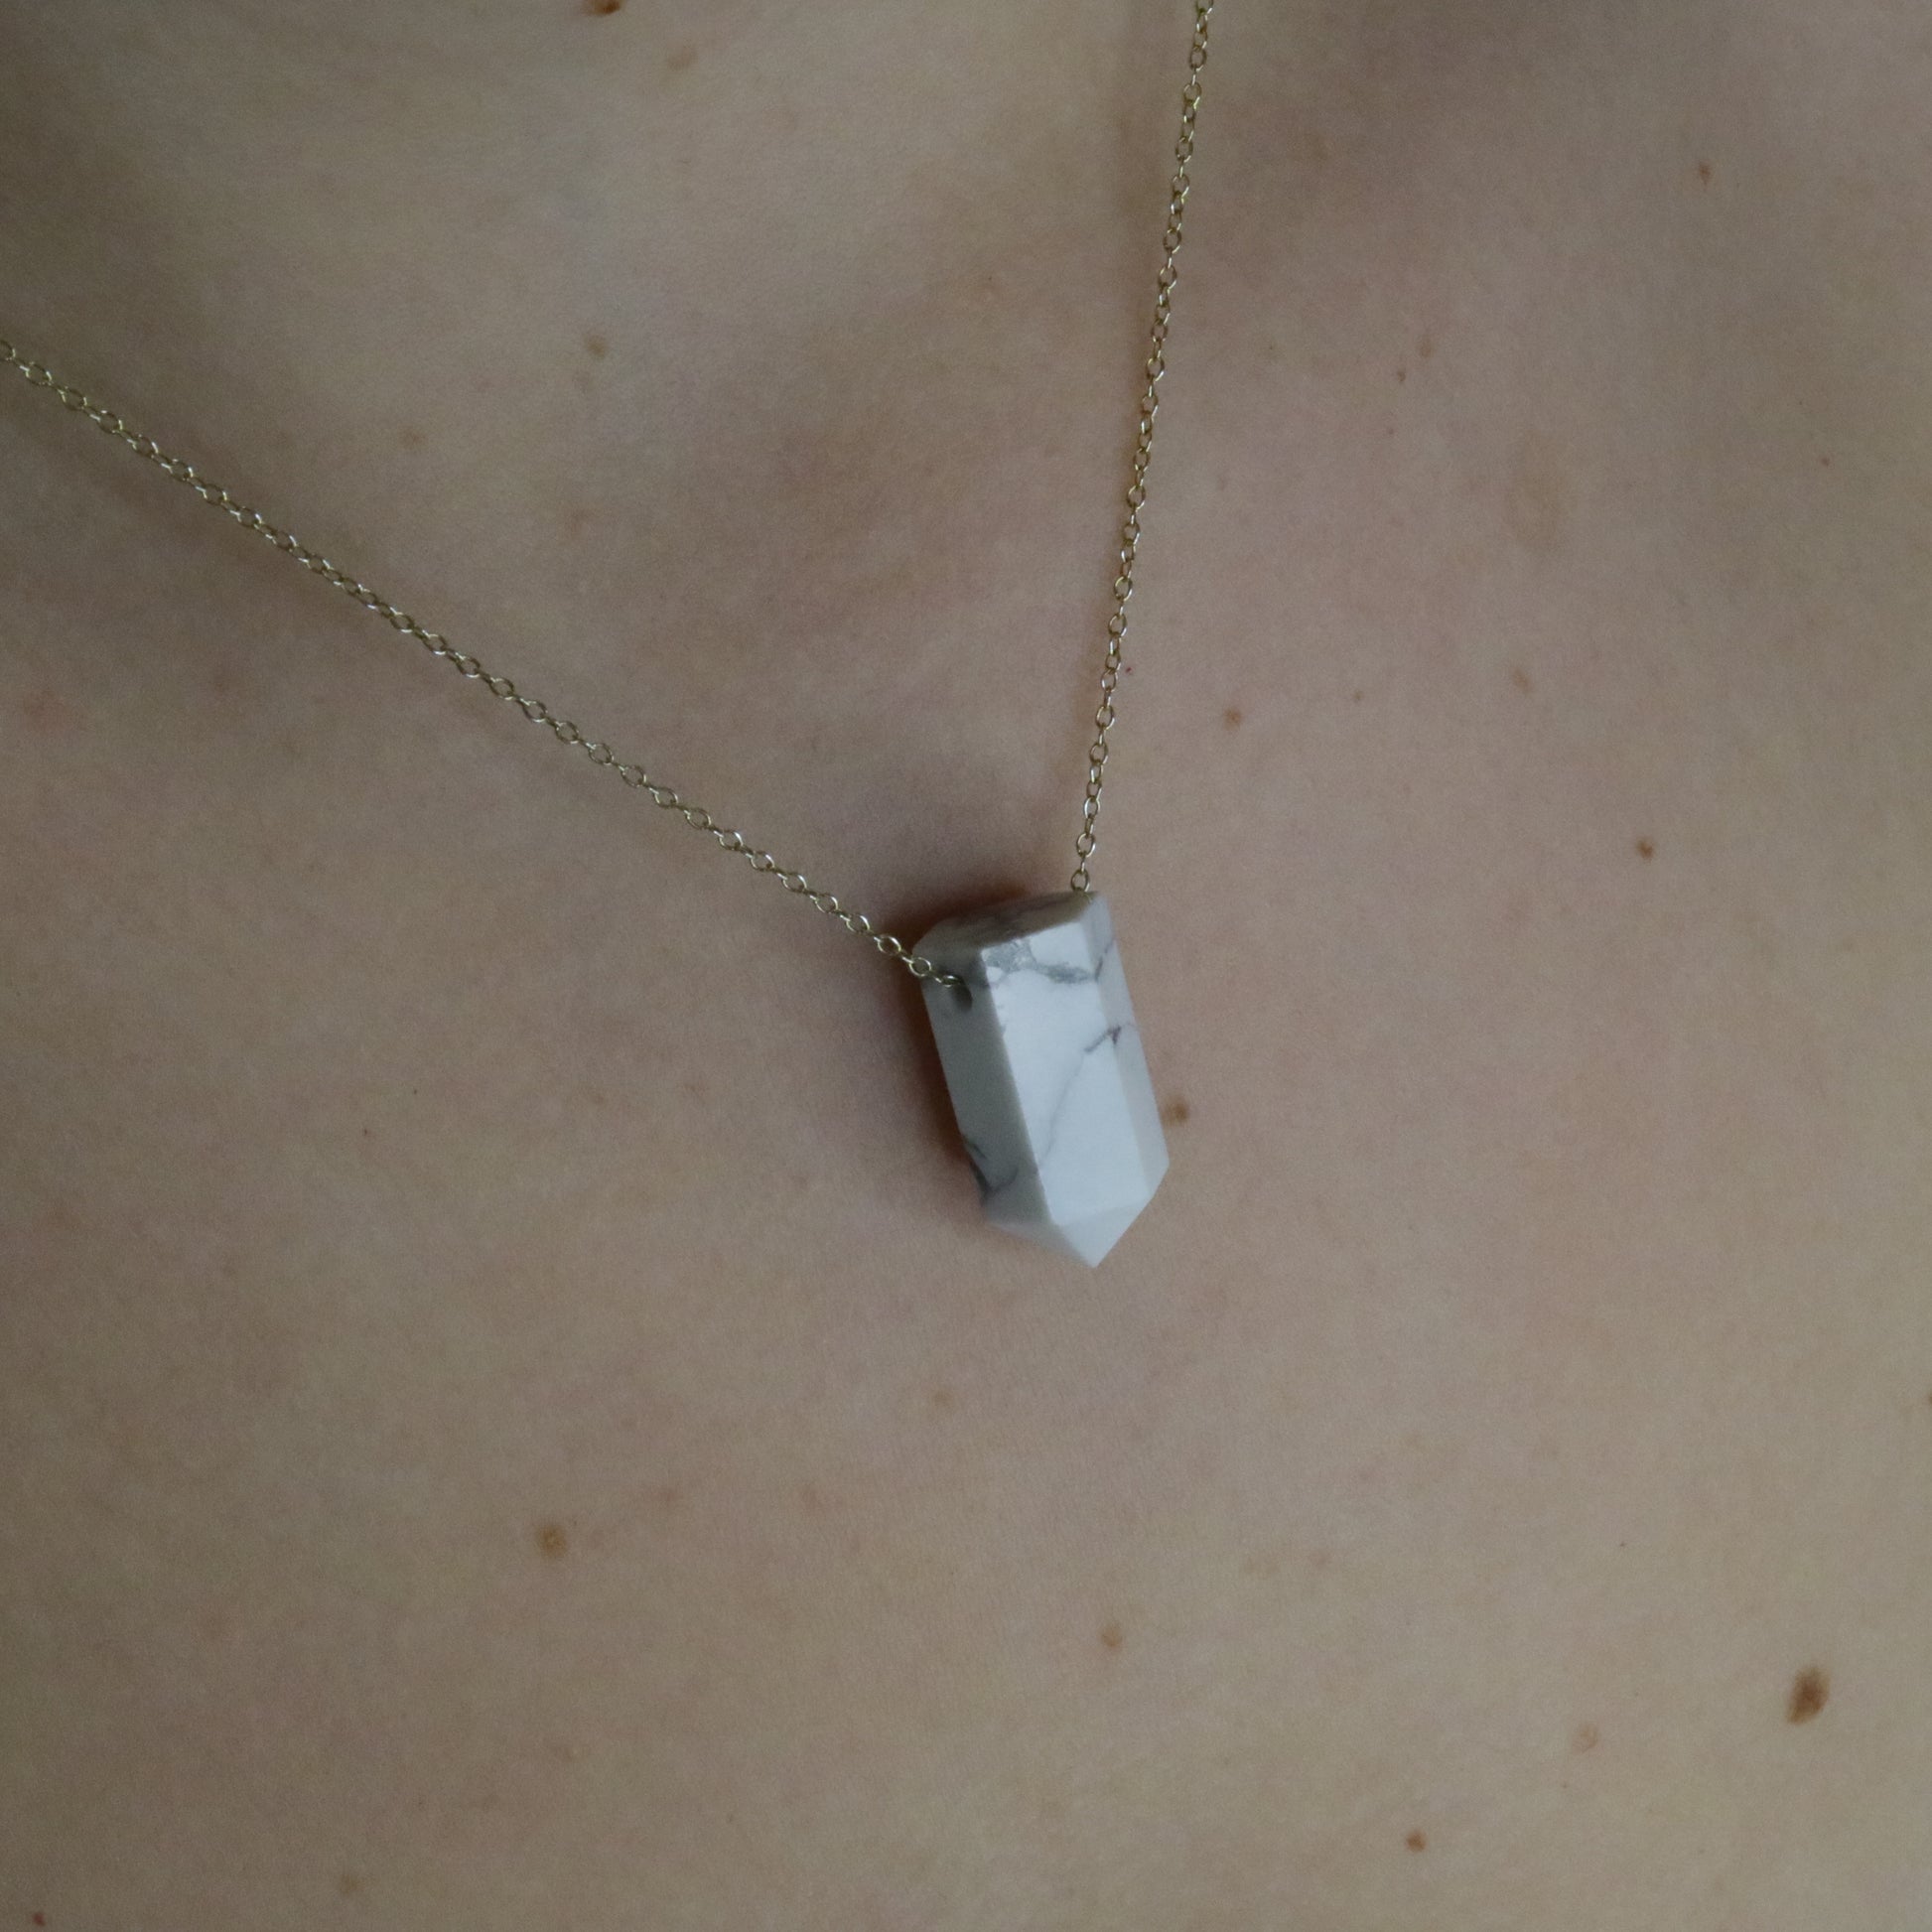 Girl wearing Howlite crystal necklace